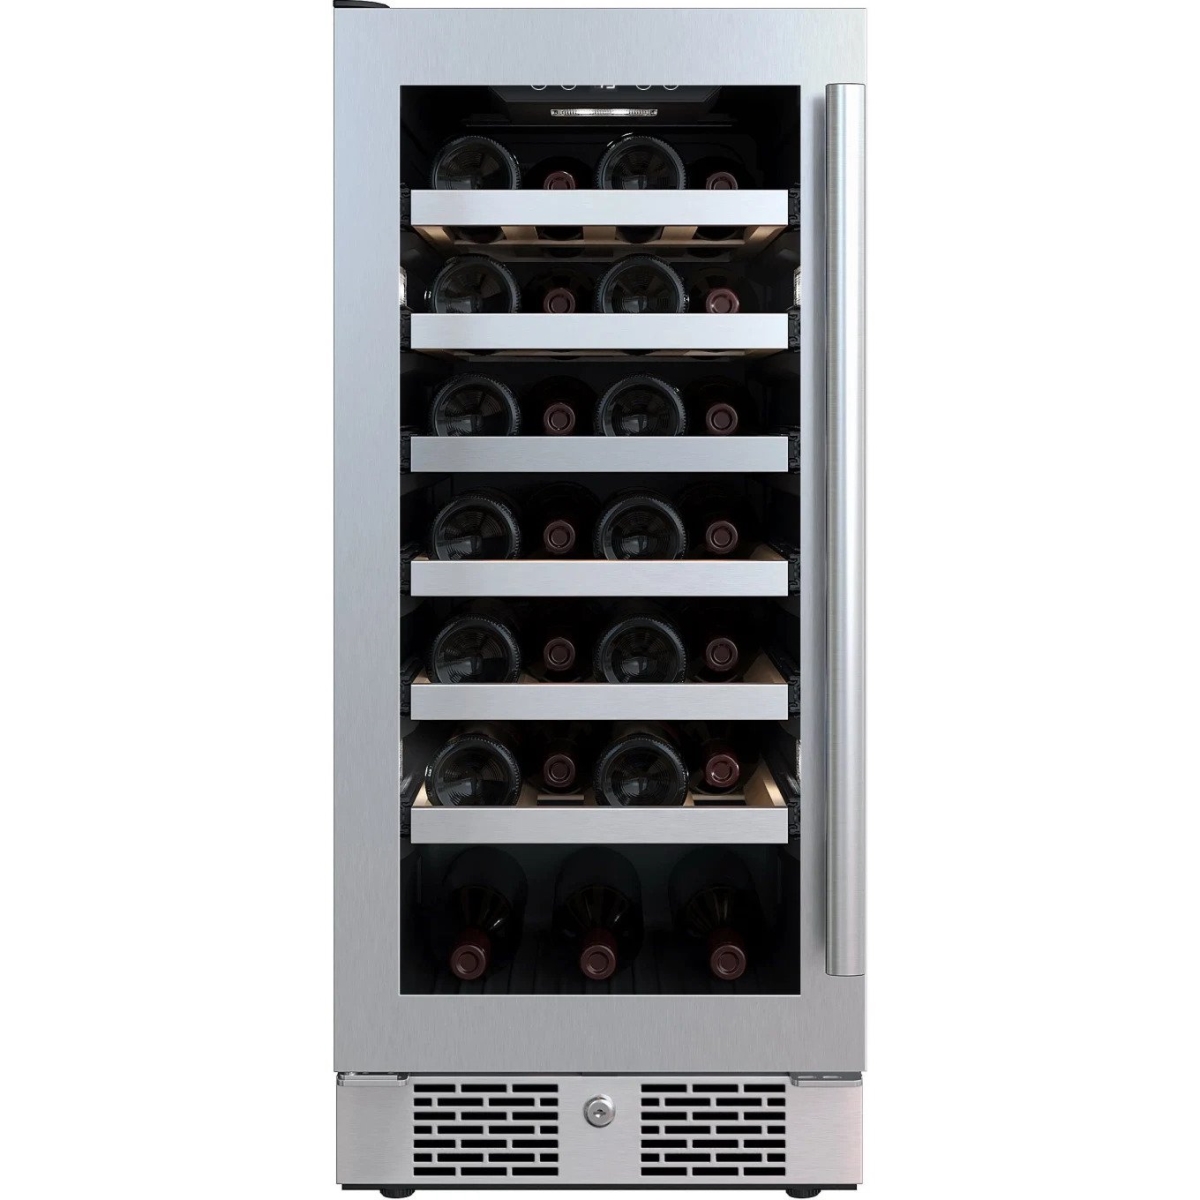 Picture of Avallon AWC152SZLH 15 in. Wide 27 Bottle Capacity Single Zone Wine Cooler with Left Swing Door, Stainless Steel - Left Hinged